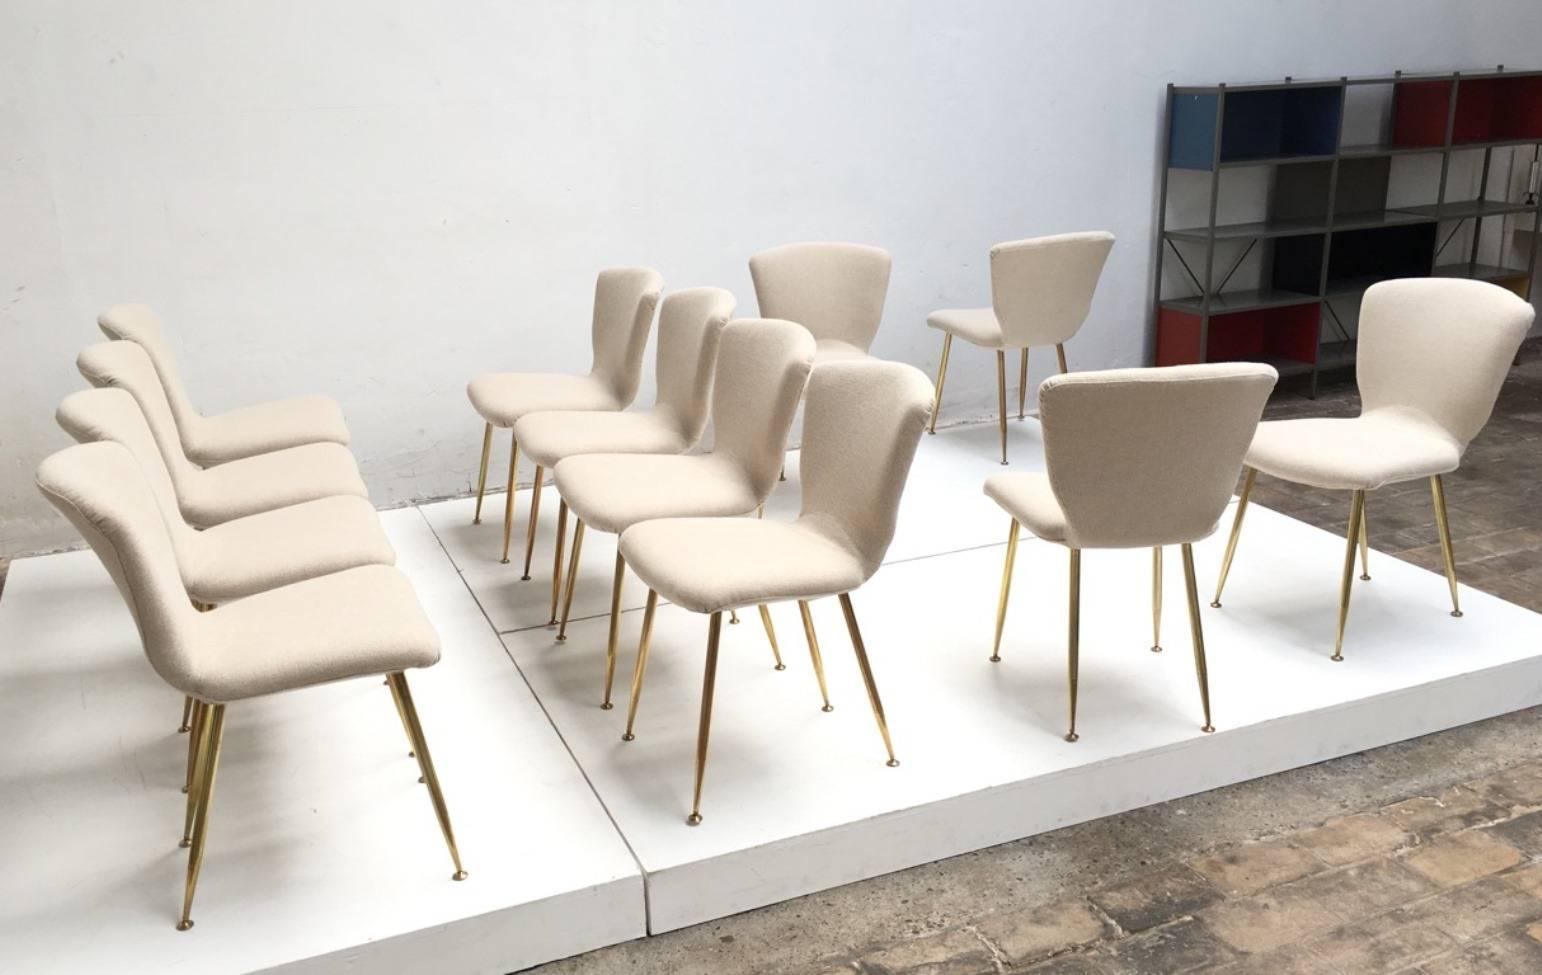 12 dining chairs by Louis Sognot for ARFLEX, 1959. Brass legs, Upholstery restored 1